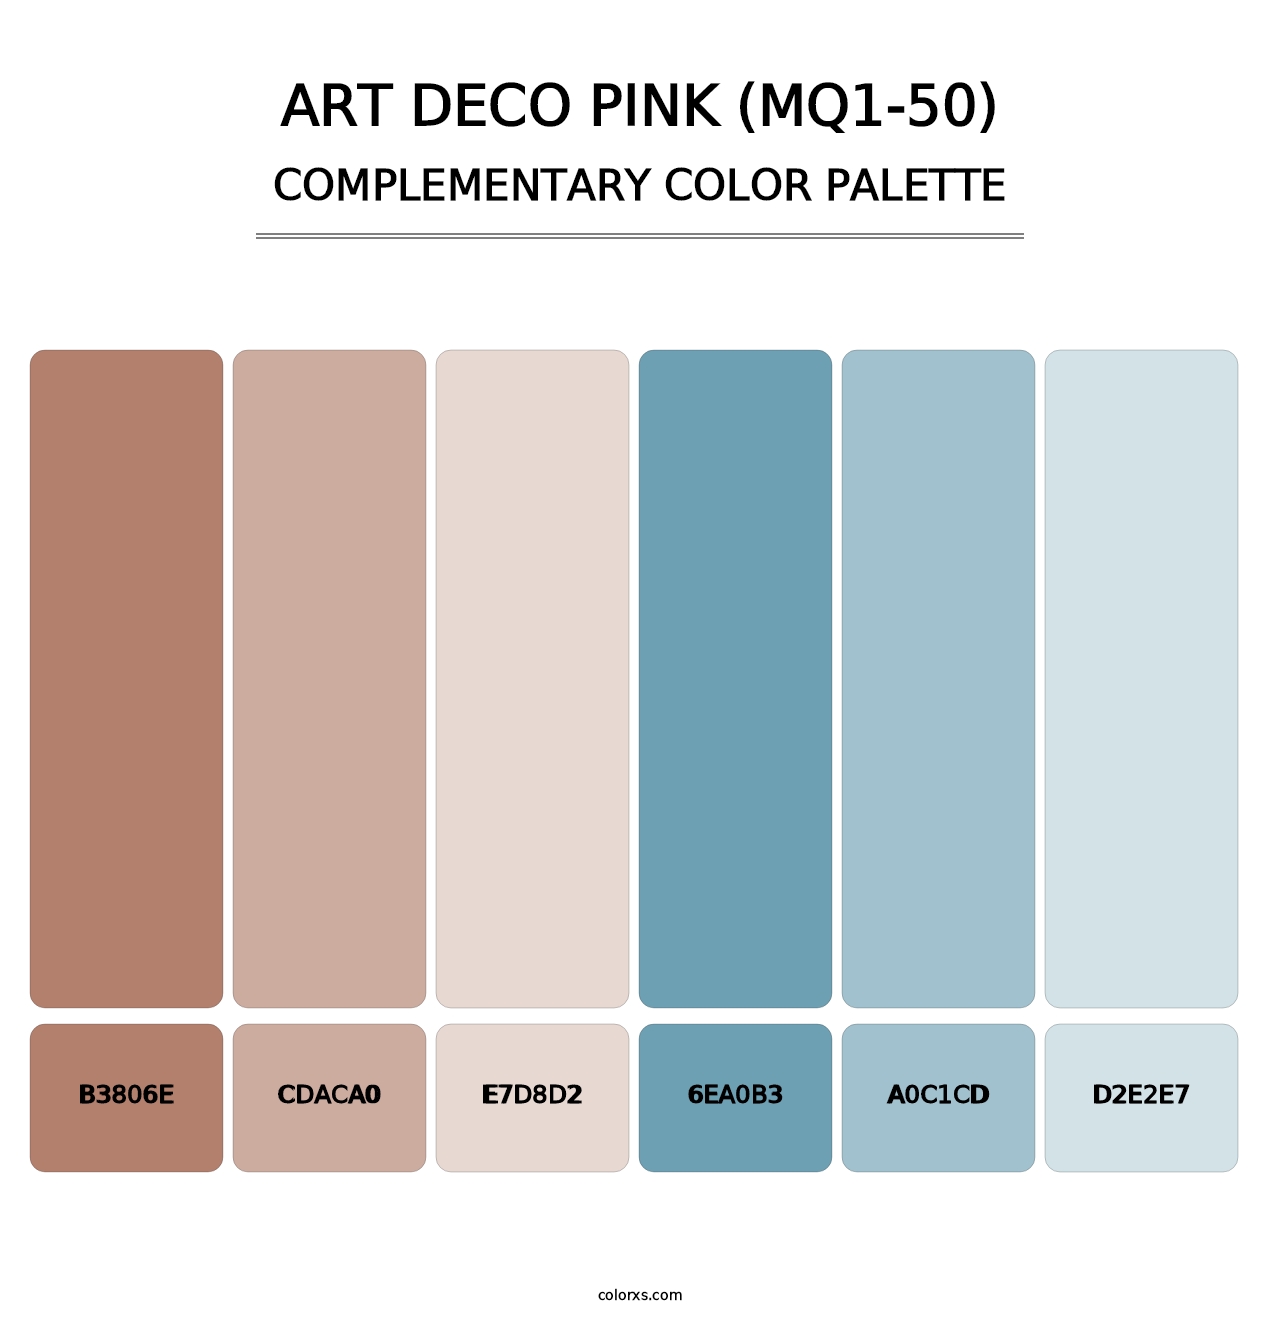 Art Deco Pink (MQ1-50) - Complementary Color Palette